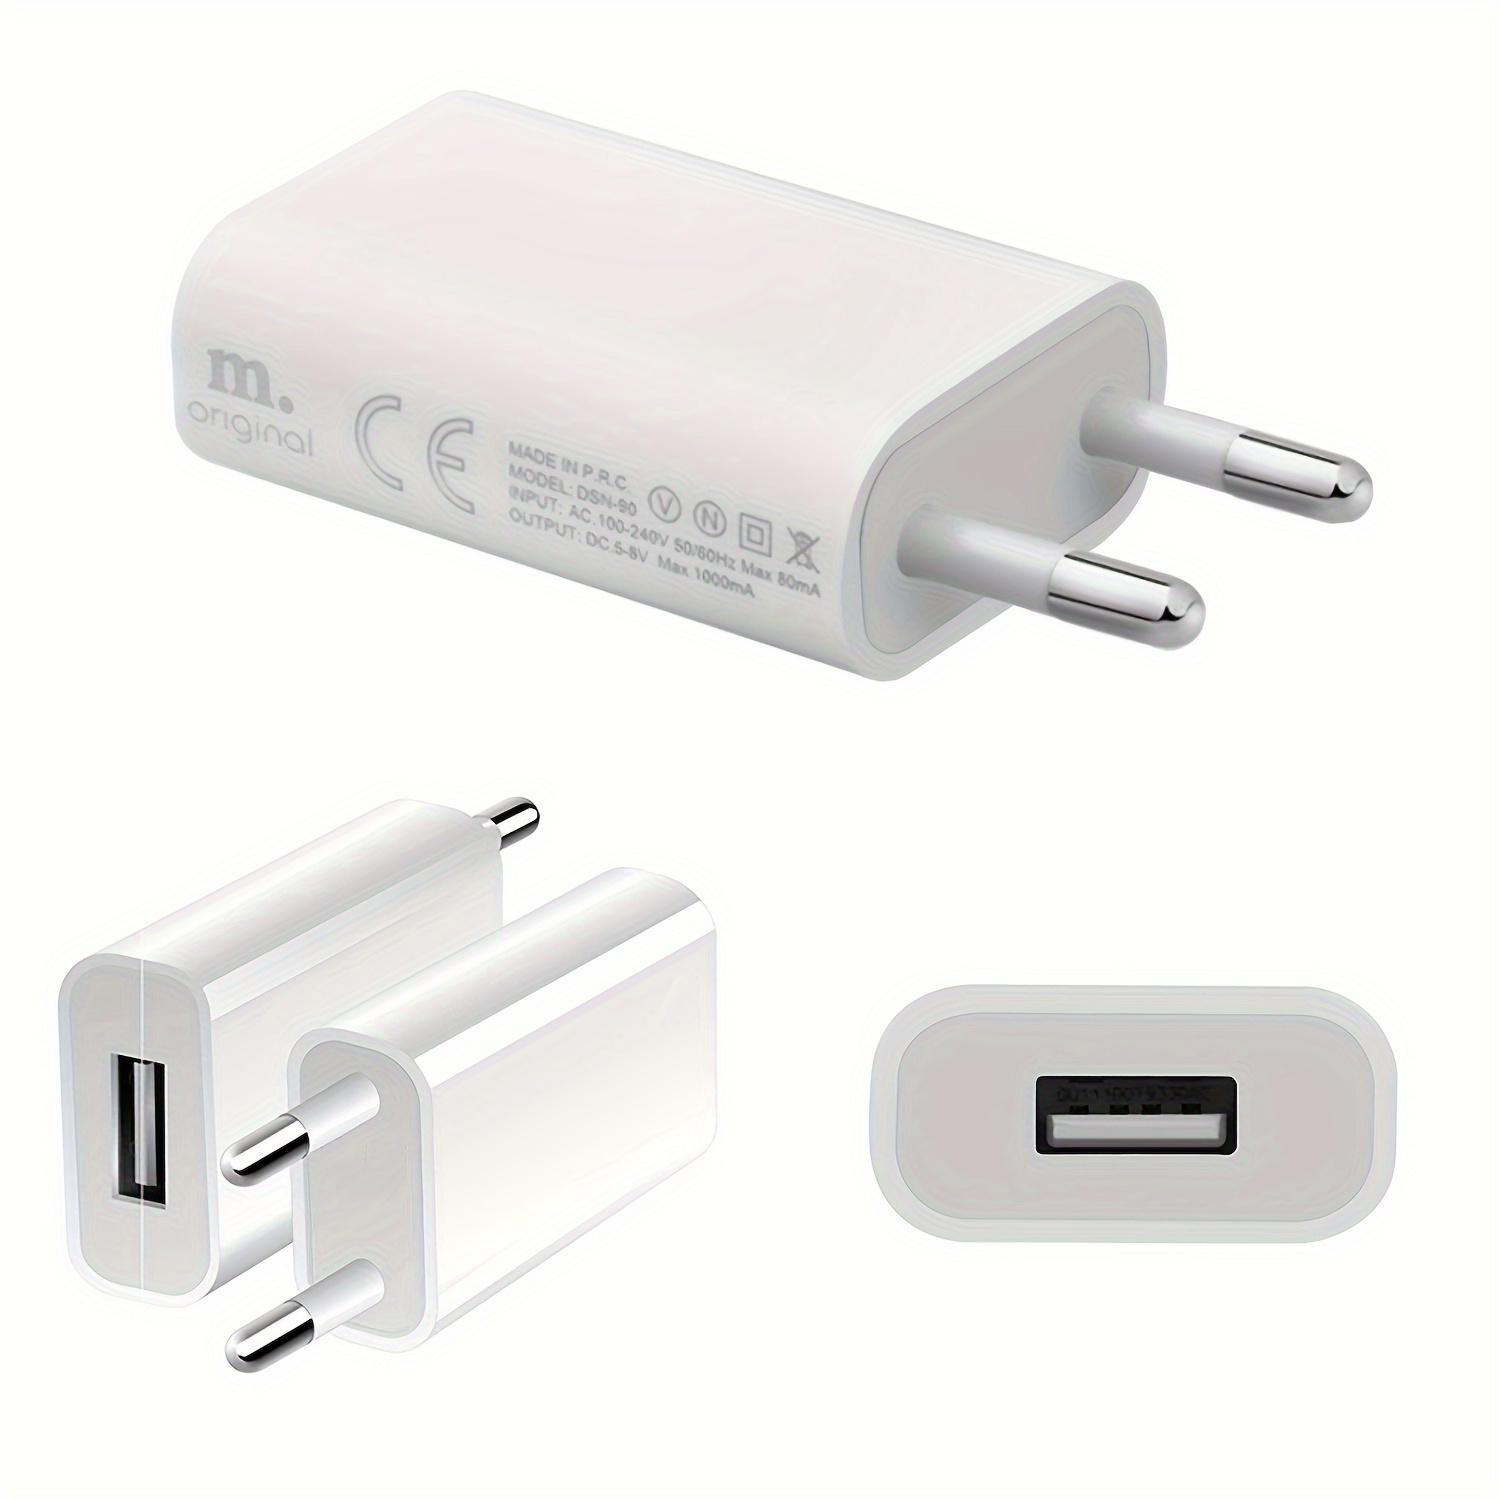 

1 Usb Wall Adapter Plug, 5w Usb Charger, 5v 1a Ultra-thin Charging Plug Power Supply, Power Plug Adapter, Tablet Socket Adapter, E-book Reader, Mp3, Smartphone Charger